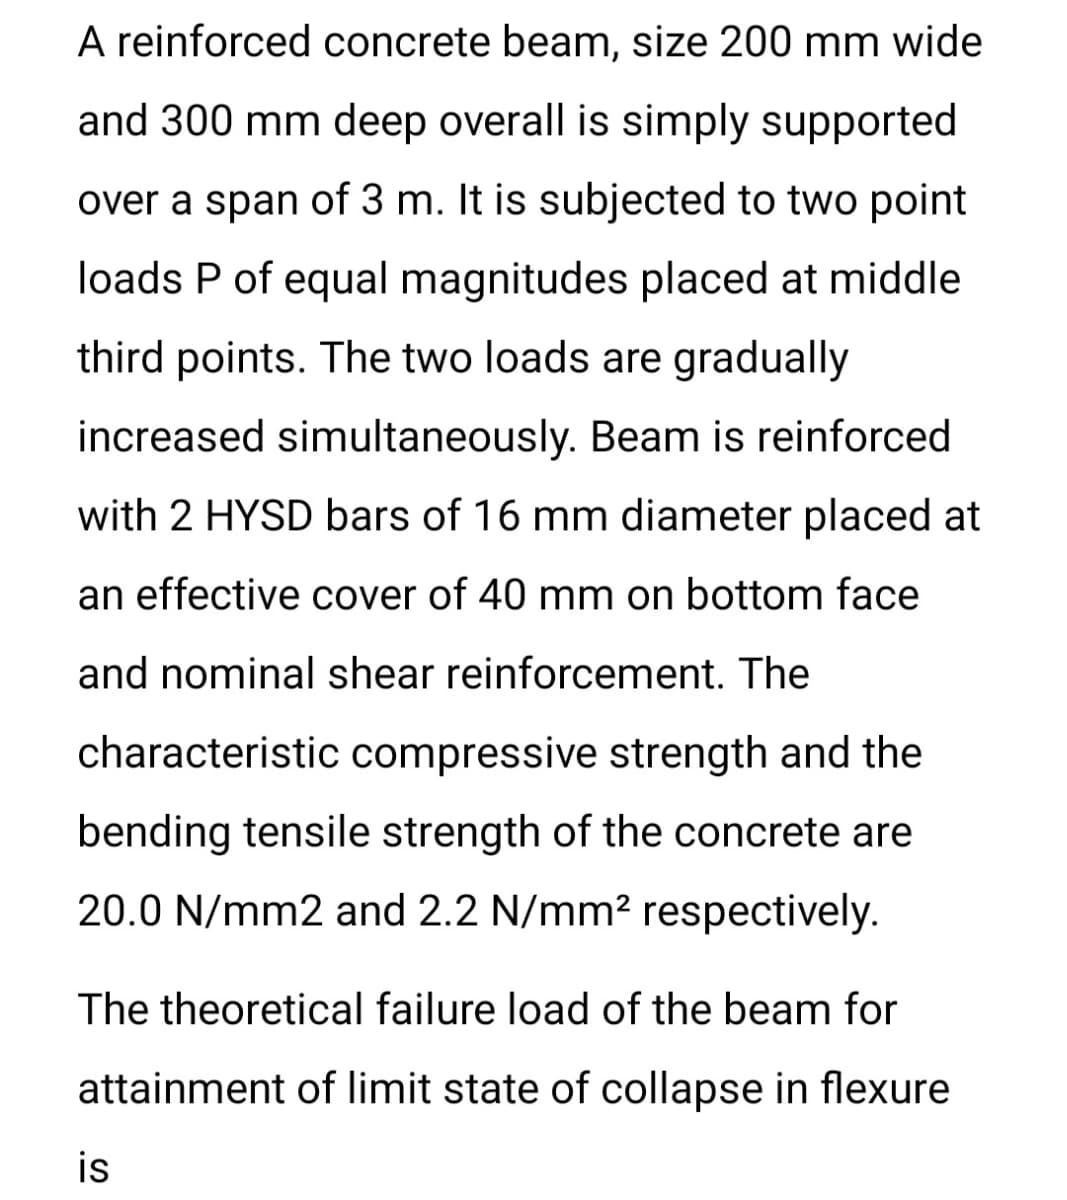 A reinforced concrete beam, size 200 mm wide
and 300 mm deep overall is simply supported
over a span of 3 m. It is subjected to two point
loads P of equal magnitudes placed at middle
third points. The two loads are gradually
increased simultaneously. Beam is reinforced
with 2 HYSD bars of 16 mm diameter placed at
an effective cover of 40 mm on bottom face
and nominal shear reinforcement. The
characteristic compressive strength and the
bending tensile strength of the concrete are
20.0 N/mm2 and 2.2 N/mm2 respectively.
The theoretical failure load of the beam for
attainment of limit state of collapse in flexure
is
